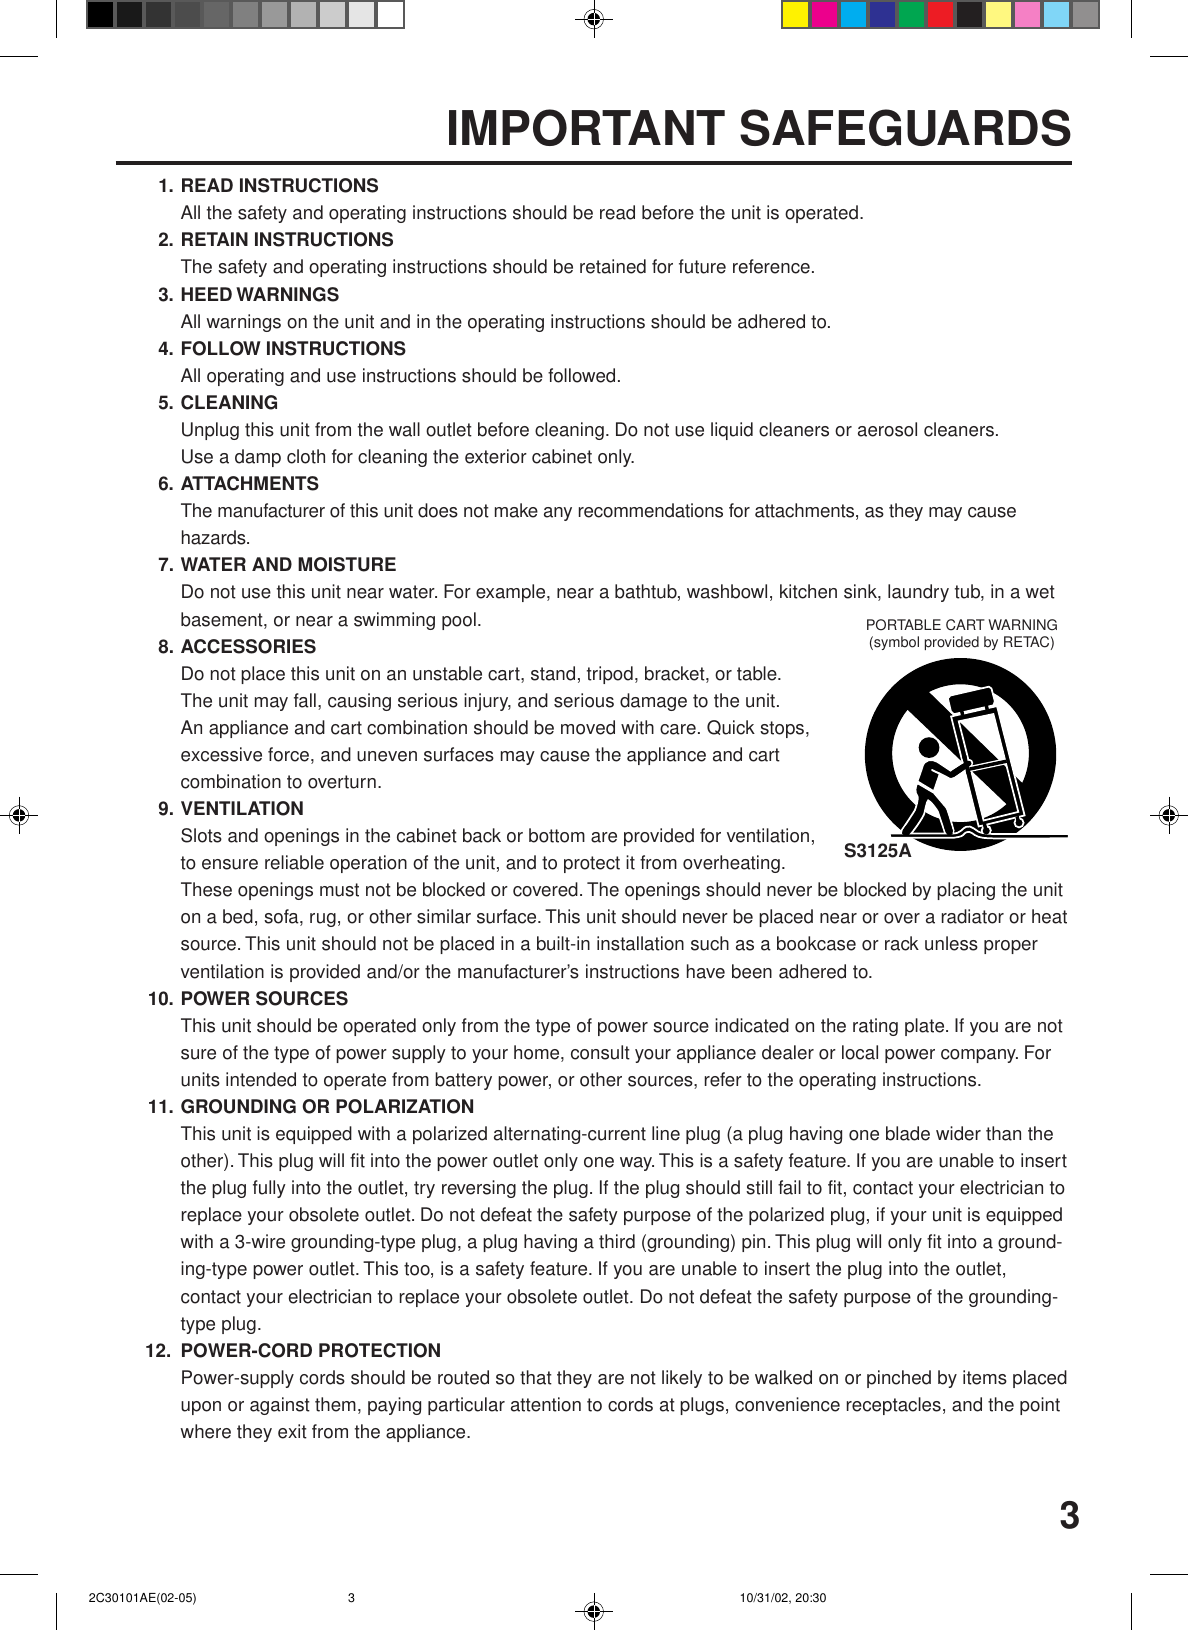 31. READ INSTRUCTIONSAll the safety and operating instructions should be read before the unit is operated.2. RETAIN INSTRUCTIONSThe safety and operating instructions should be retained for future reference.3. HEED WARNINGSAll warnings on the unit and in the operating instructions should be adhered to.4. FOLLOW INSTRUCTIONSAll operating and use instructions should be followed.5. CLEANINGUnplug this unit from the wall outlet before cleaning. Do not use liquid cleaners or aerosol cleaners.Use a damp cloth for cleaning the exterior cabinet only.6. ATTACHMENTSThe manufacturer of this unit does not make any recommendations for attachments, as they may causehazards.7. WATER AND MOISTUREDo not use this unit near water. For example, near a bathtub, washbowl, kitchen sink, laundry tub, in a wetbasement, or near a swimming pool.8. ACCESSORIESDo not place this unit on an unstable cart, stand, tripod, bracket, or table.The unit may fall, causing serious injury, and serious damage to the unit.An appliance and cart combination should be moved with care. Quick stops,excessive force, and uneven surfaces may cause the appliance and cartcombination to overturn.9. VENTILATIONSlots and openings in the cabinet back or bottom are provided for ventilation,to ensure reliable operation of the unit, and to protect it from overheating.These openings must not be blocked or covered. The openings should never be blocked by placing the uniton a bed, sofa, rug, or other similar surface. This unit should never be placed near or over a radiator or heatsource. This unit should not be placed in a built-in installation such as a bookcase or rack unless properventilation is provided and/or the manufacturer’s instructions have been adhered to.10. POWER SOURCESThis unit should be operated only from the type of power source indicated on the rating plate. If you are notsure of the type of power supply to your home, consult your appliance dealer or local power company. Forunits intended to operate from battery power, or other sources, refer to the operating instructions.11. GROUNDING OR POLARIZATIONThis unit is equipped with a polarized alternating-current line plug (a plug having one blade wider than theother). This plug will fit into the power outlet only one way. This is a safety feature. If you are unable to insertthe plug fully into the outlet, try reversing the plug. If the plug should still fail to fit, contact your electrician toreplace your obsolete outlet. Do not defeat the safety purpose of the polarized plug, if your unit is equippedwith a 3-wire grounding-type plug, a plug having a third (grounding) pin. This plug will only fit into a ground-ing-type power outlet. This too, is a safety feature. If you are unable to insert the plug into the outlet,contact your electrician to replace your obsolete outlet. Do not defeat the safety purpose of the grounding-type plug.12. POWER-CORD PROTECTIONPower-supply cords should be routed so that they are not likely to be walked on or pinched by items placedupon or against them, paying particular attention to cords at plugs, convenience receptacles, and the pointwhere they exit from the appliance.S3125APORTABLE CART WARNING(symbol provided by RETAC)IMPORTANT SAFEGUARDS 2C30101AE(02-05) 10/31/02, 20:303